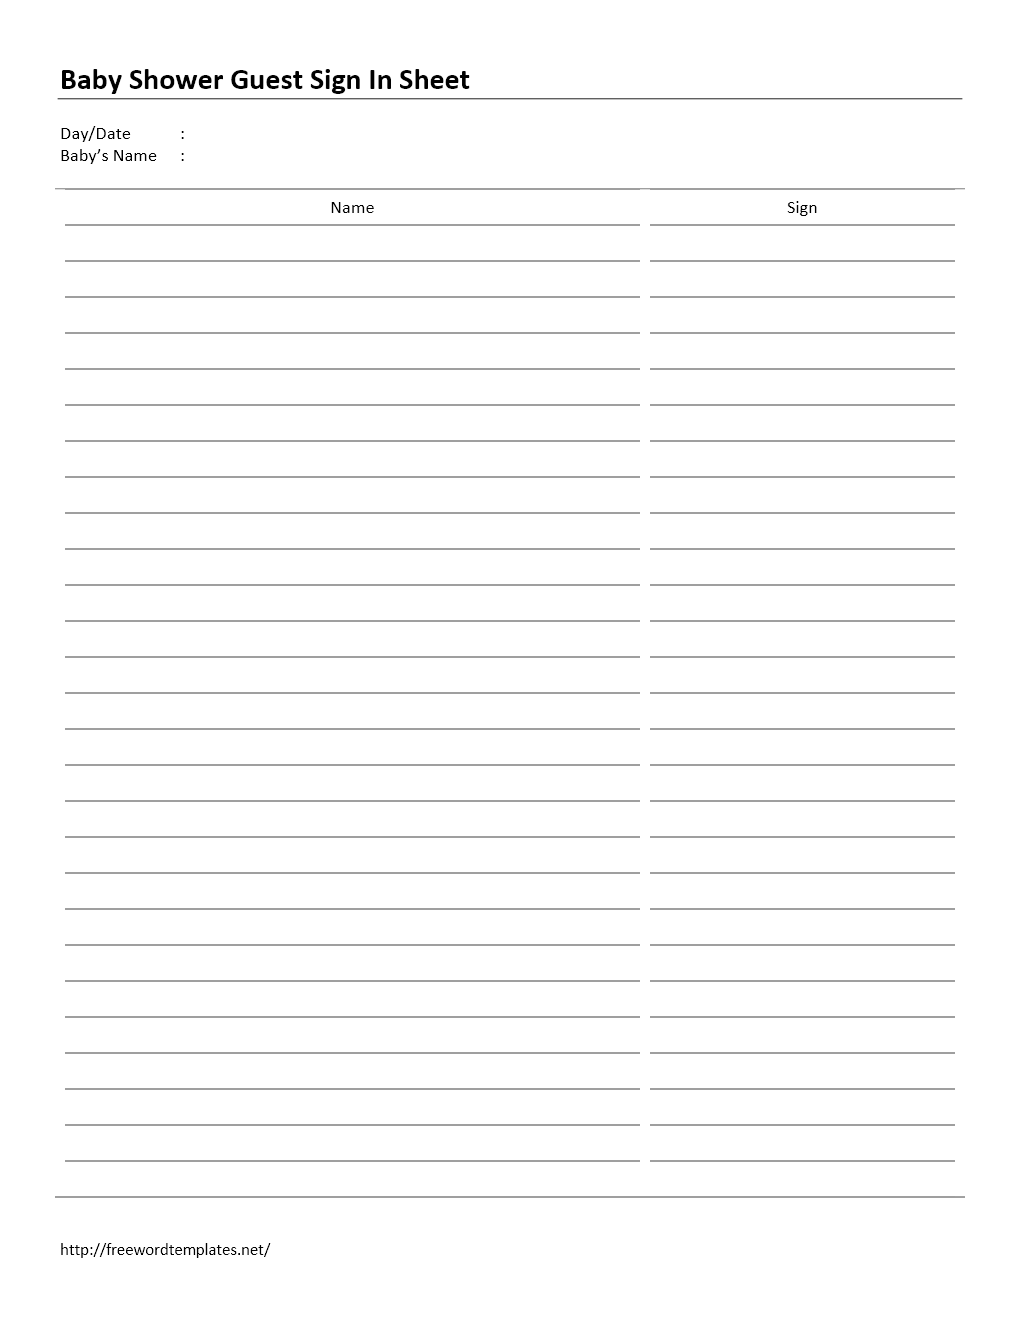 baby-shower-guest-list-template-8-free-sample-example-format-download